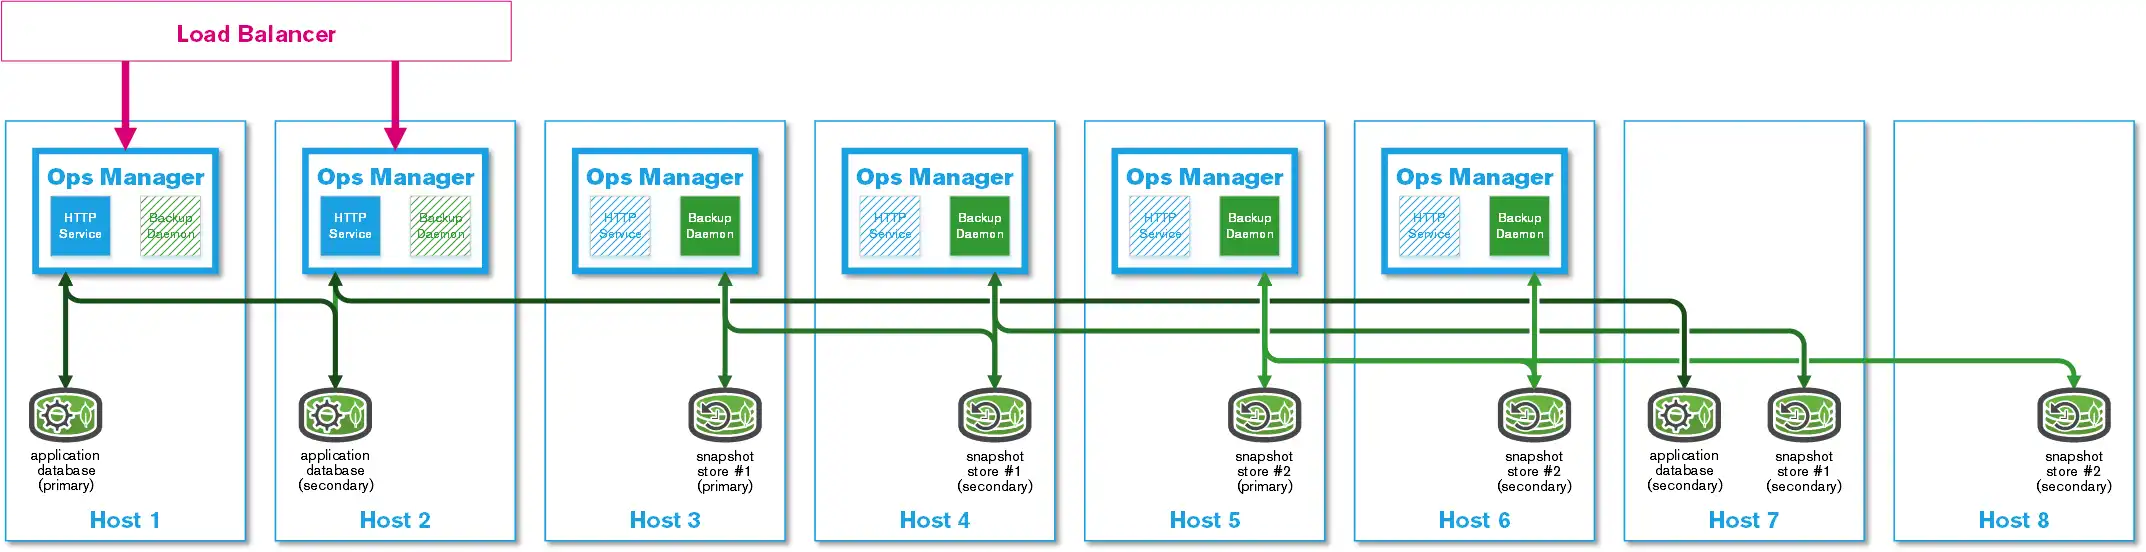 A highly available deployment uses horizontal scaling of the application database and snapshot store for backups, as well as multiple backup daemons.